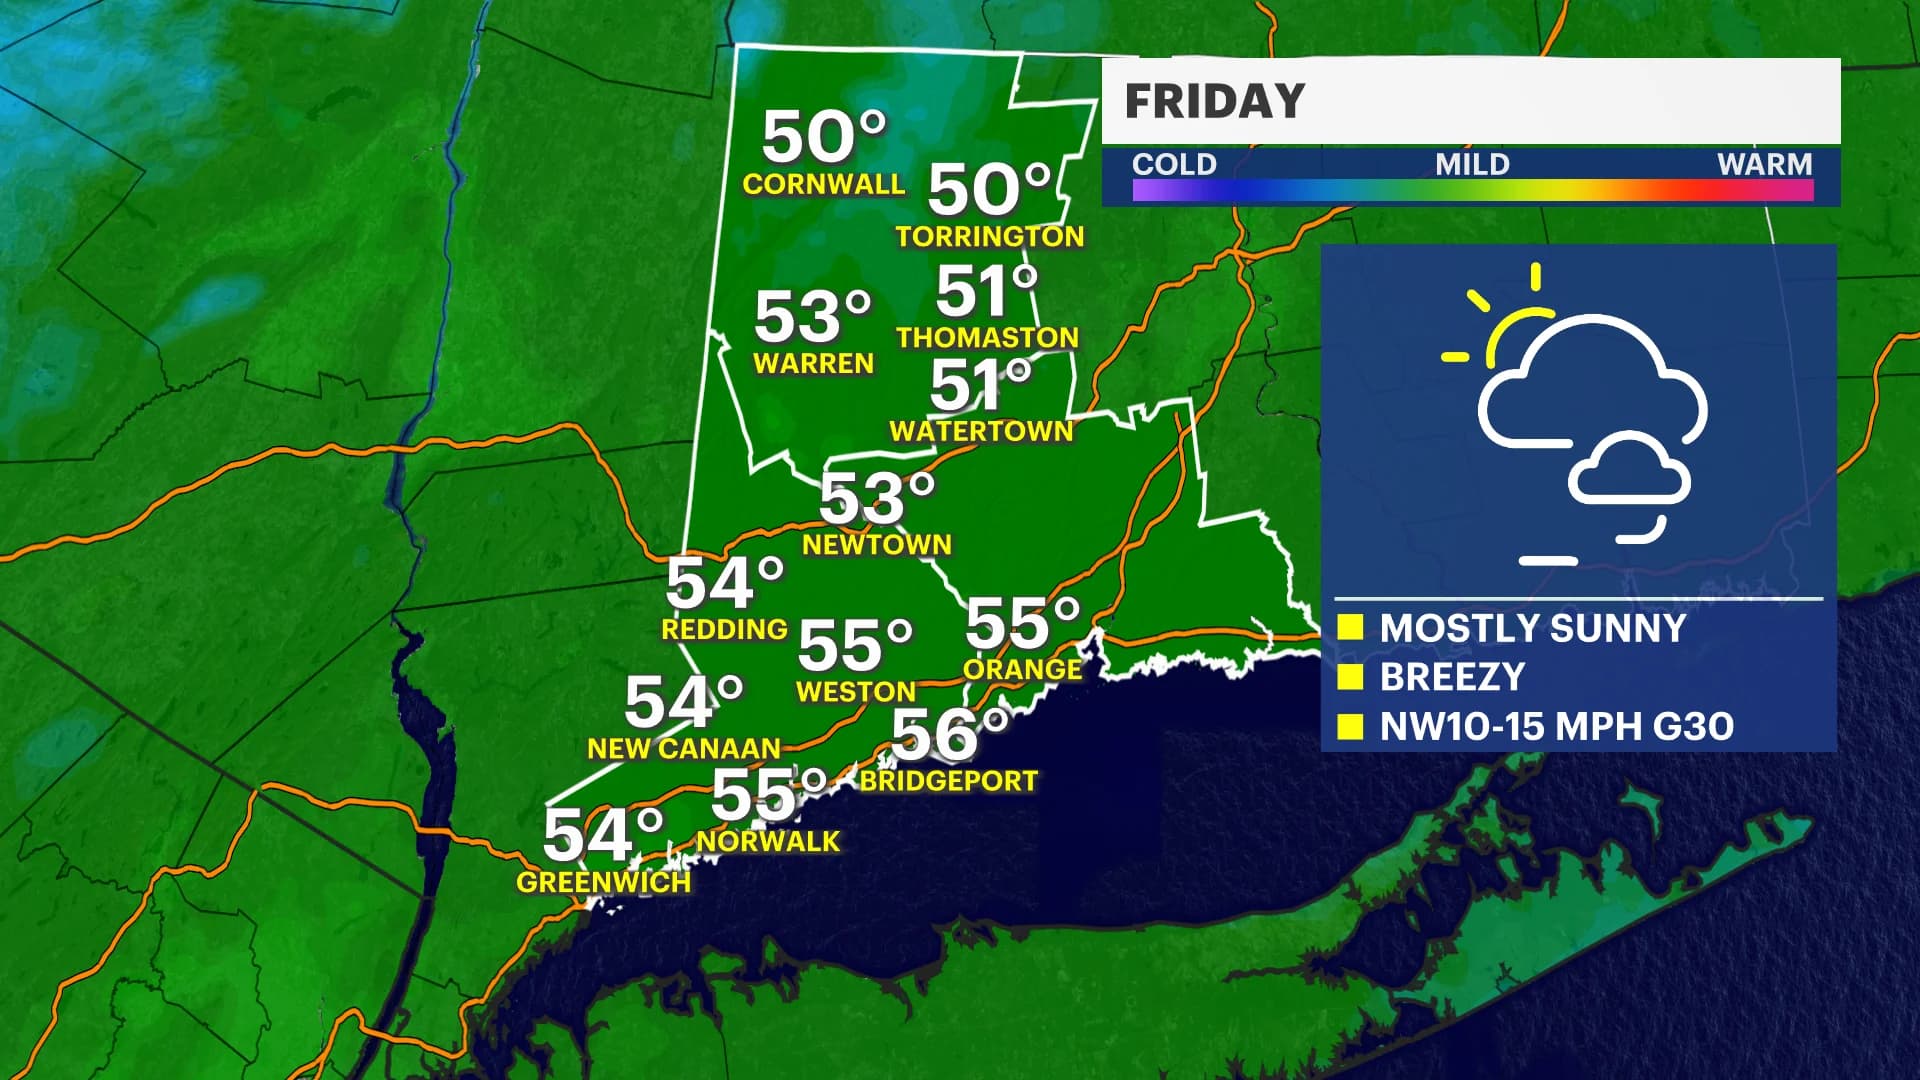 Bright and blustery on Friday across Connecticut